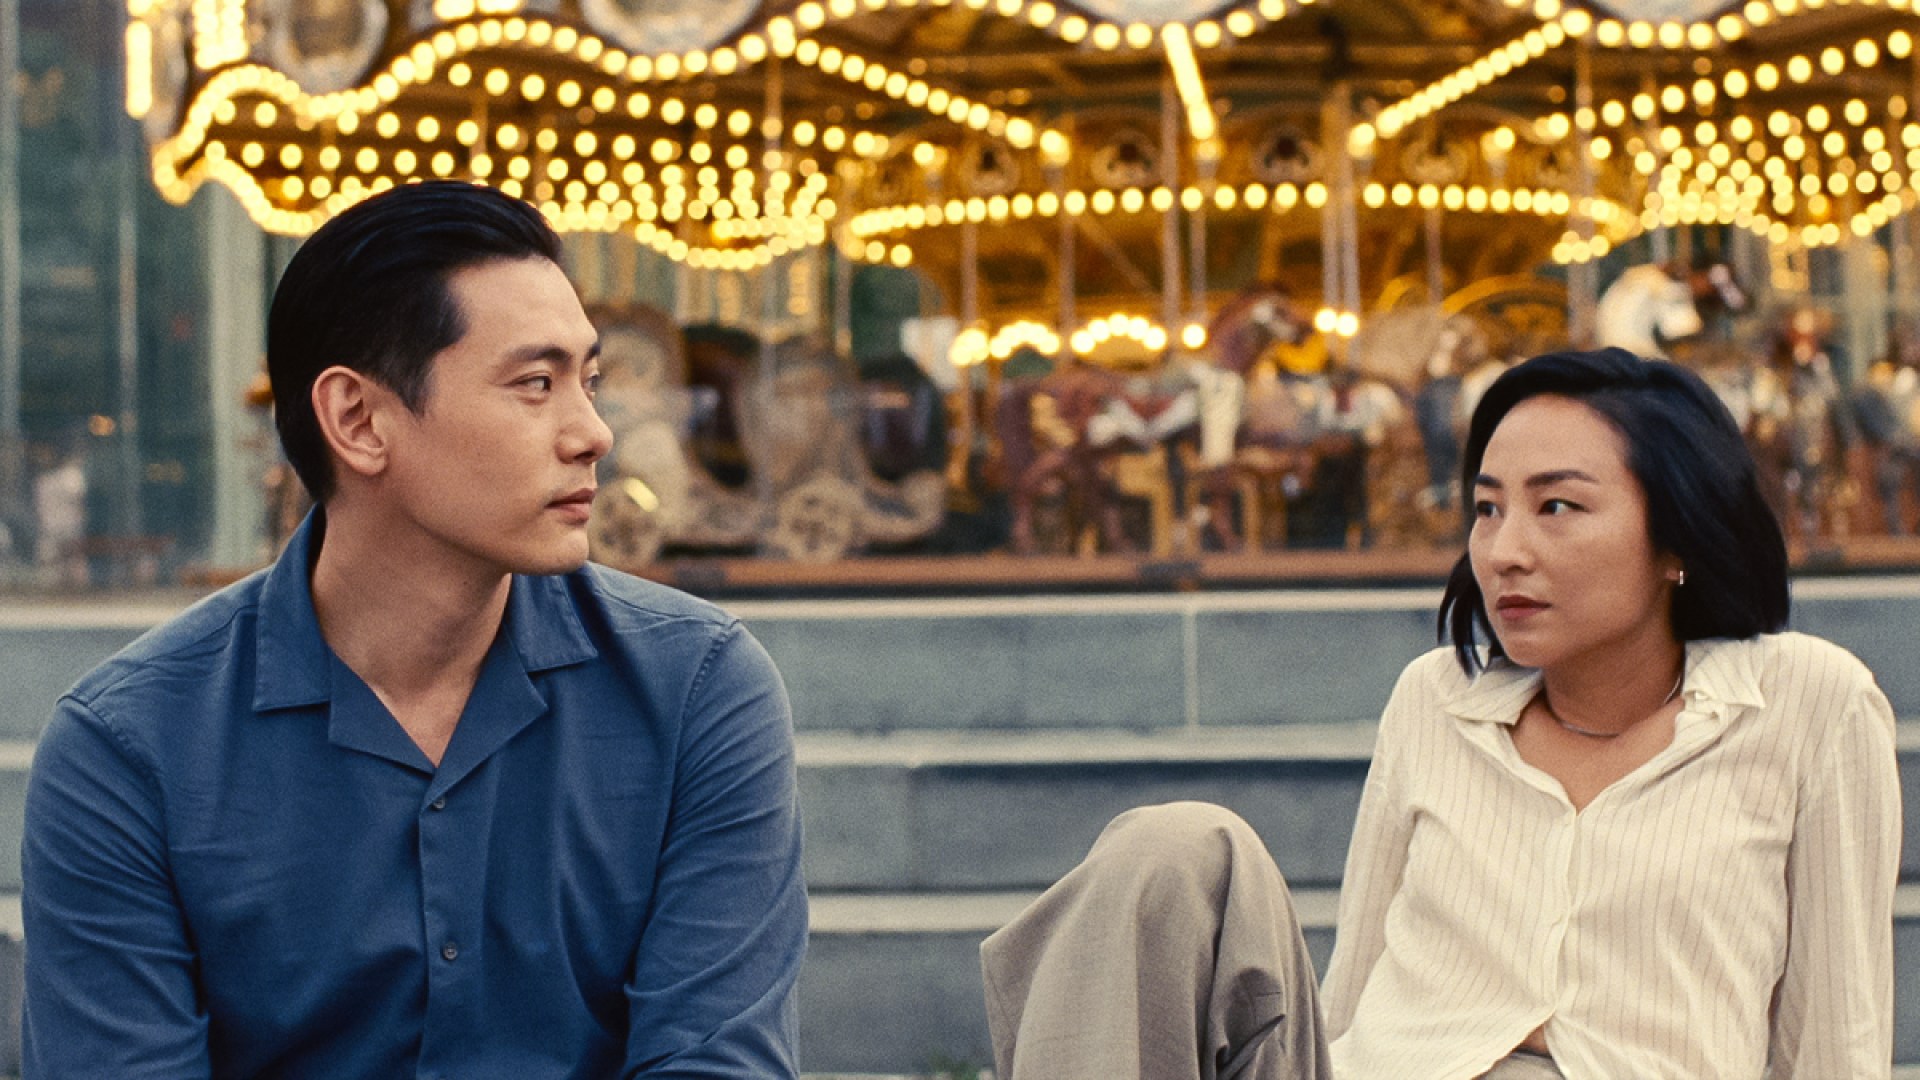 Promo image for A24's upcoming film Past Lives, starring Greta Lee (bae) and Teo Yoo.